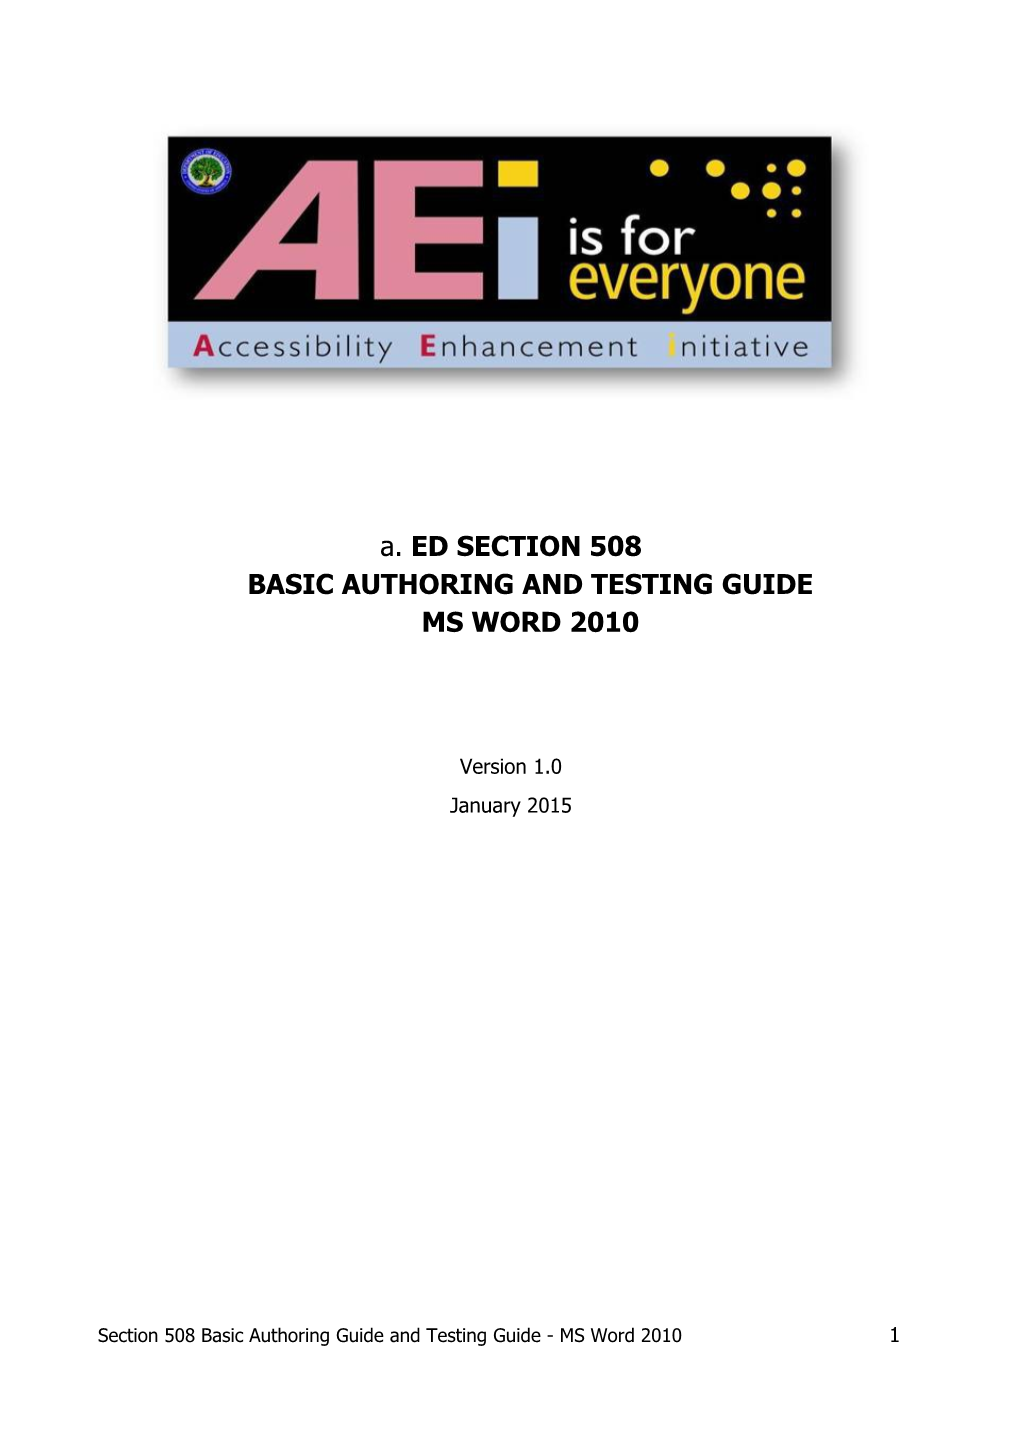 Ed Section 508 Basic Authoring and Testing Guide Ms Word 2010